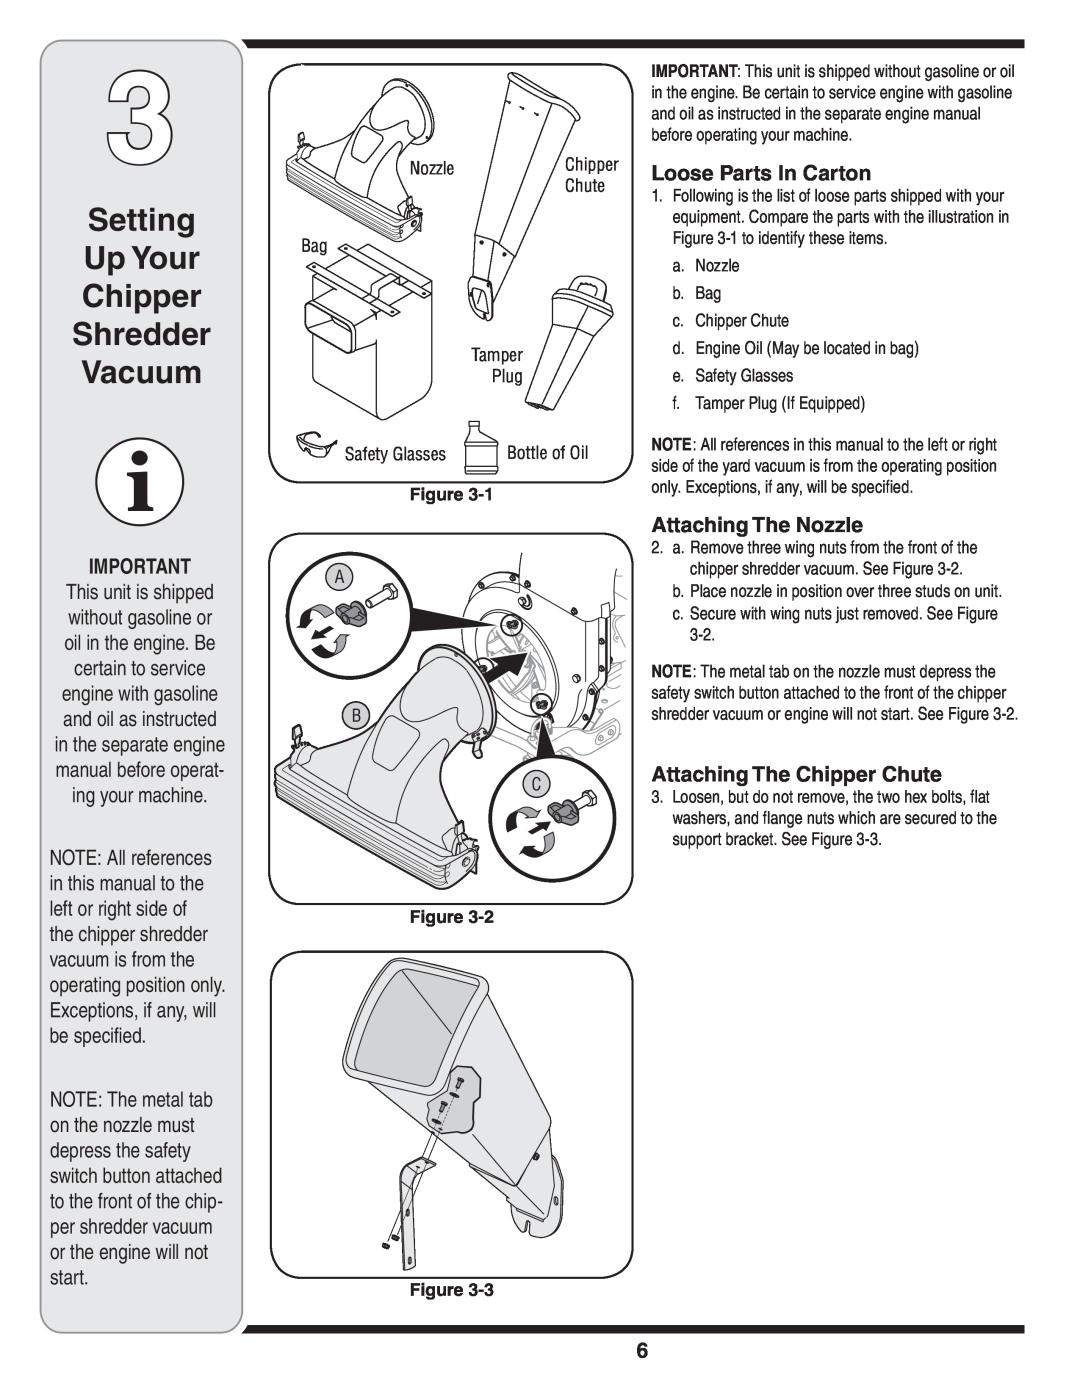 Troy-Bilt 204 warranty Setting Up Your Chipper Shredder Vacuum, Loose Parts In Carton, Attaching The Nozzle 